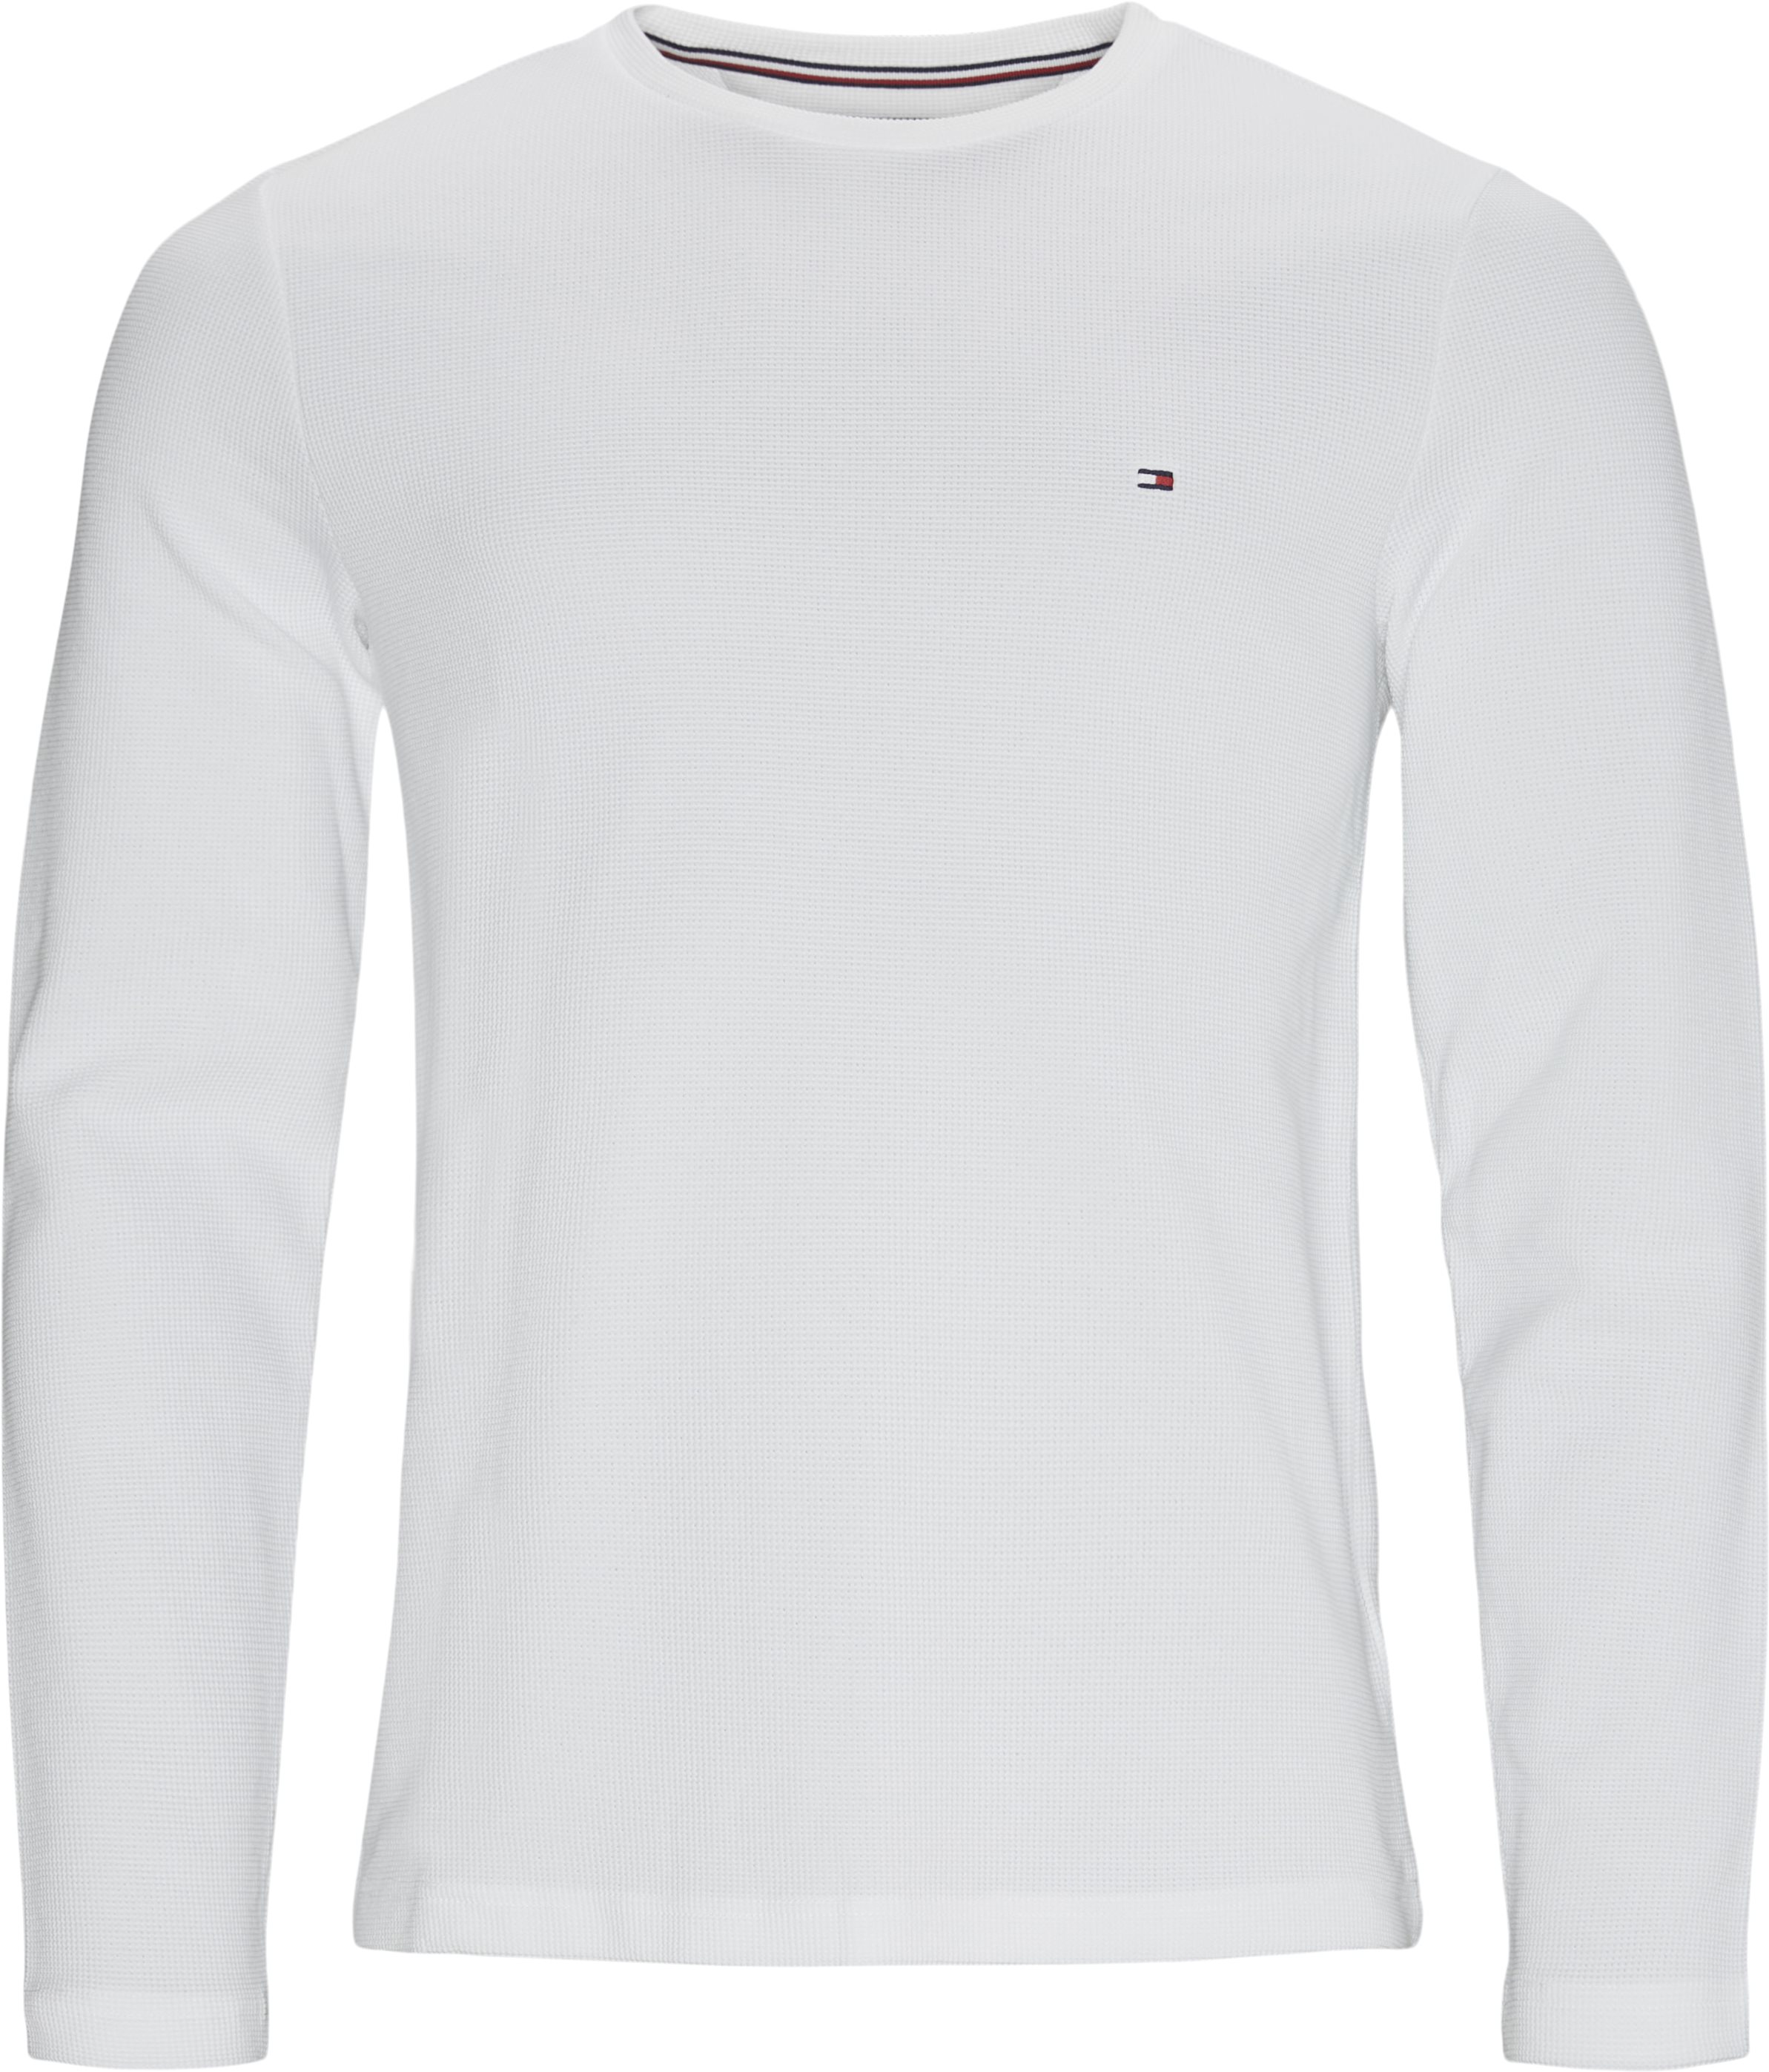 Tommy Hilfiger Waffle Long Sleeve Tee T-Shirt Homme